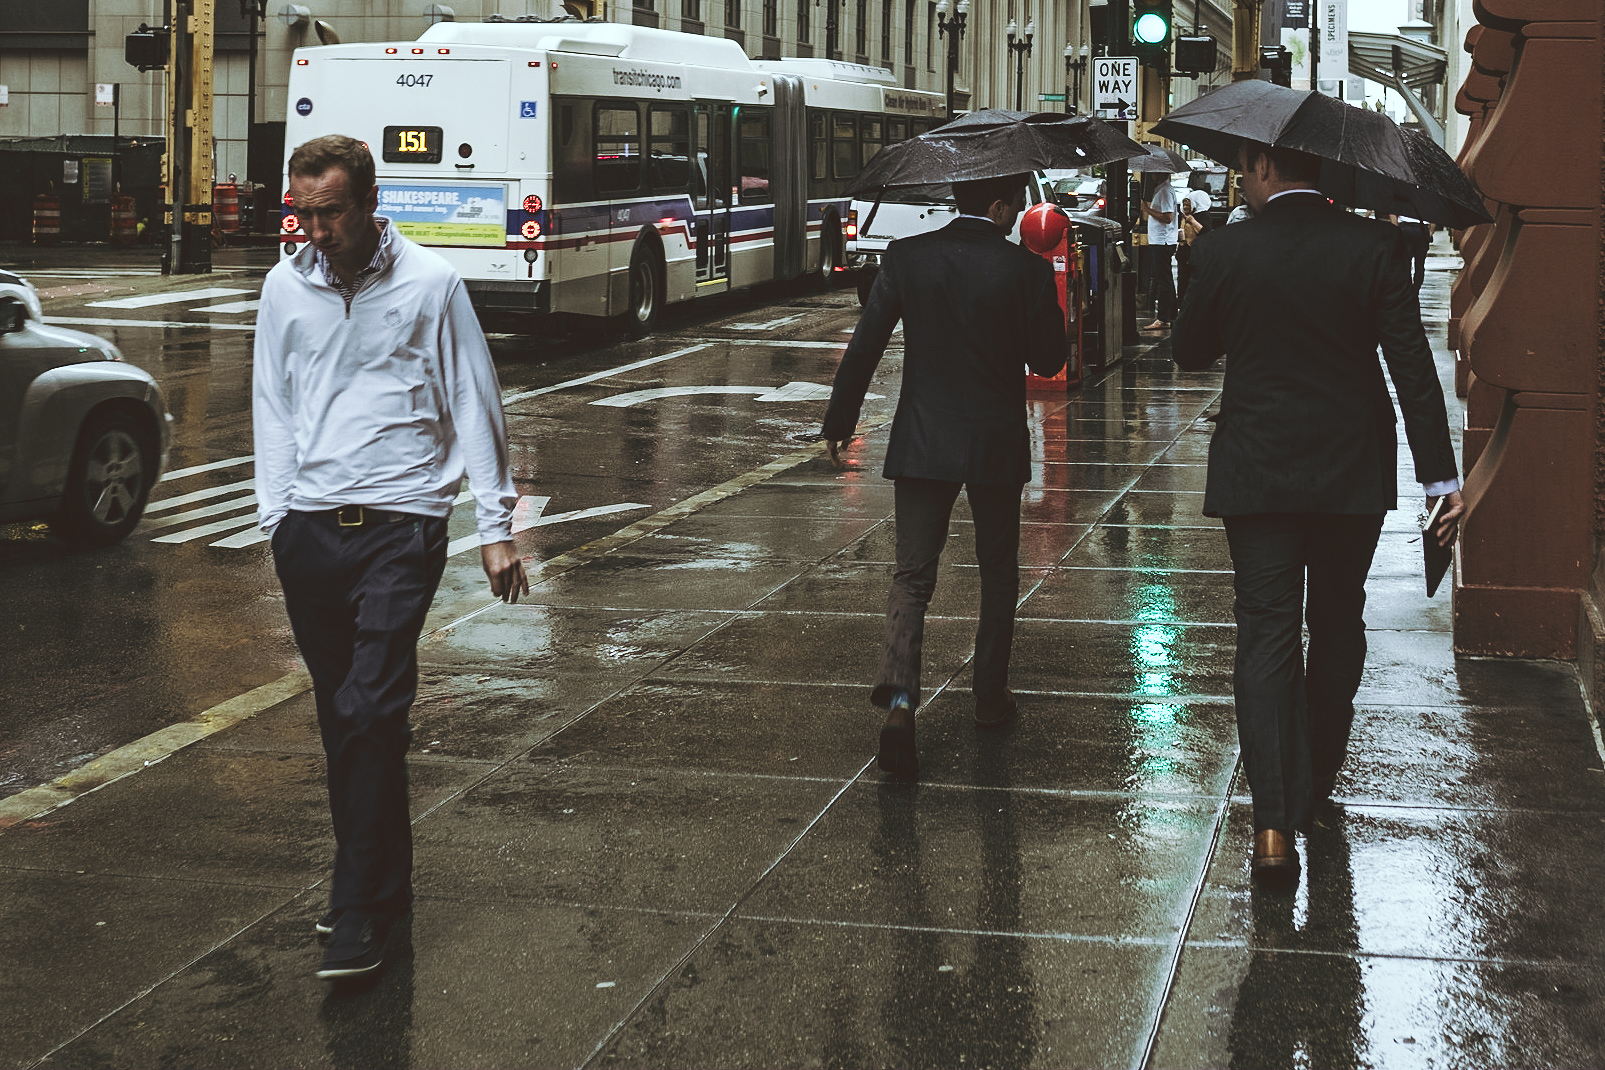 A man walks down a windy Chicago sidewalk squinting into the rain. People around him carry umbrellas.